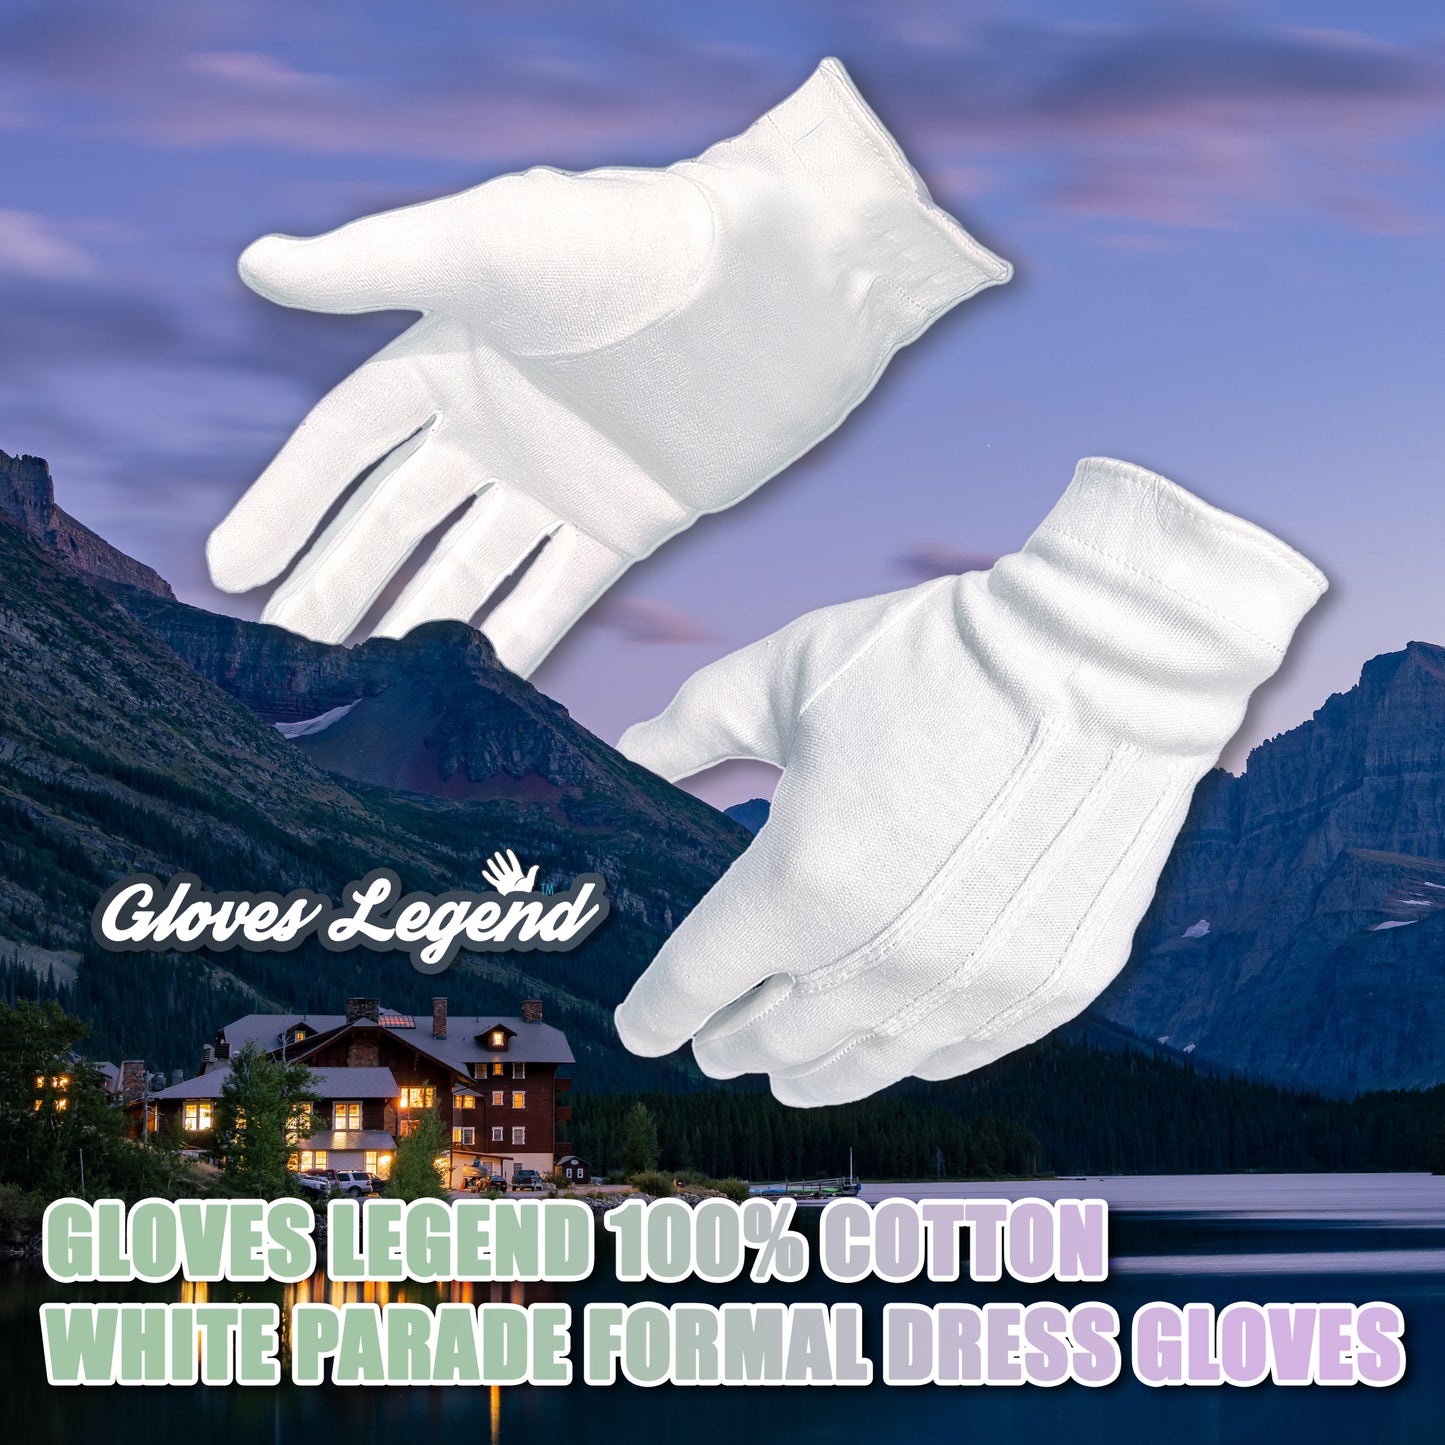 3 Pairs (6 Gloves) Size Medium - Gloves Legend 100% White Cotton Marching Parade Formal Dress Gloves